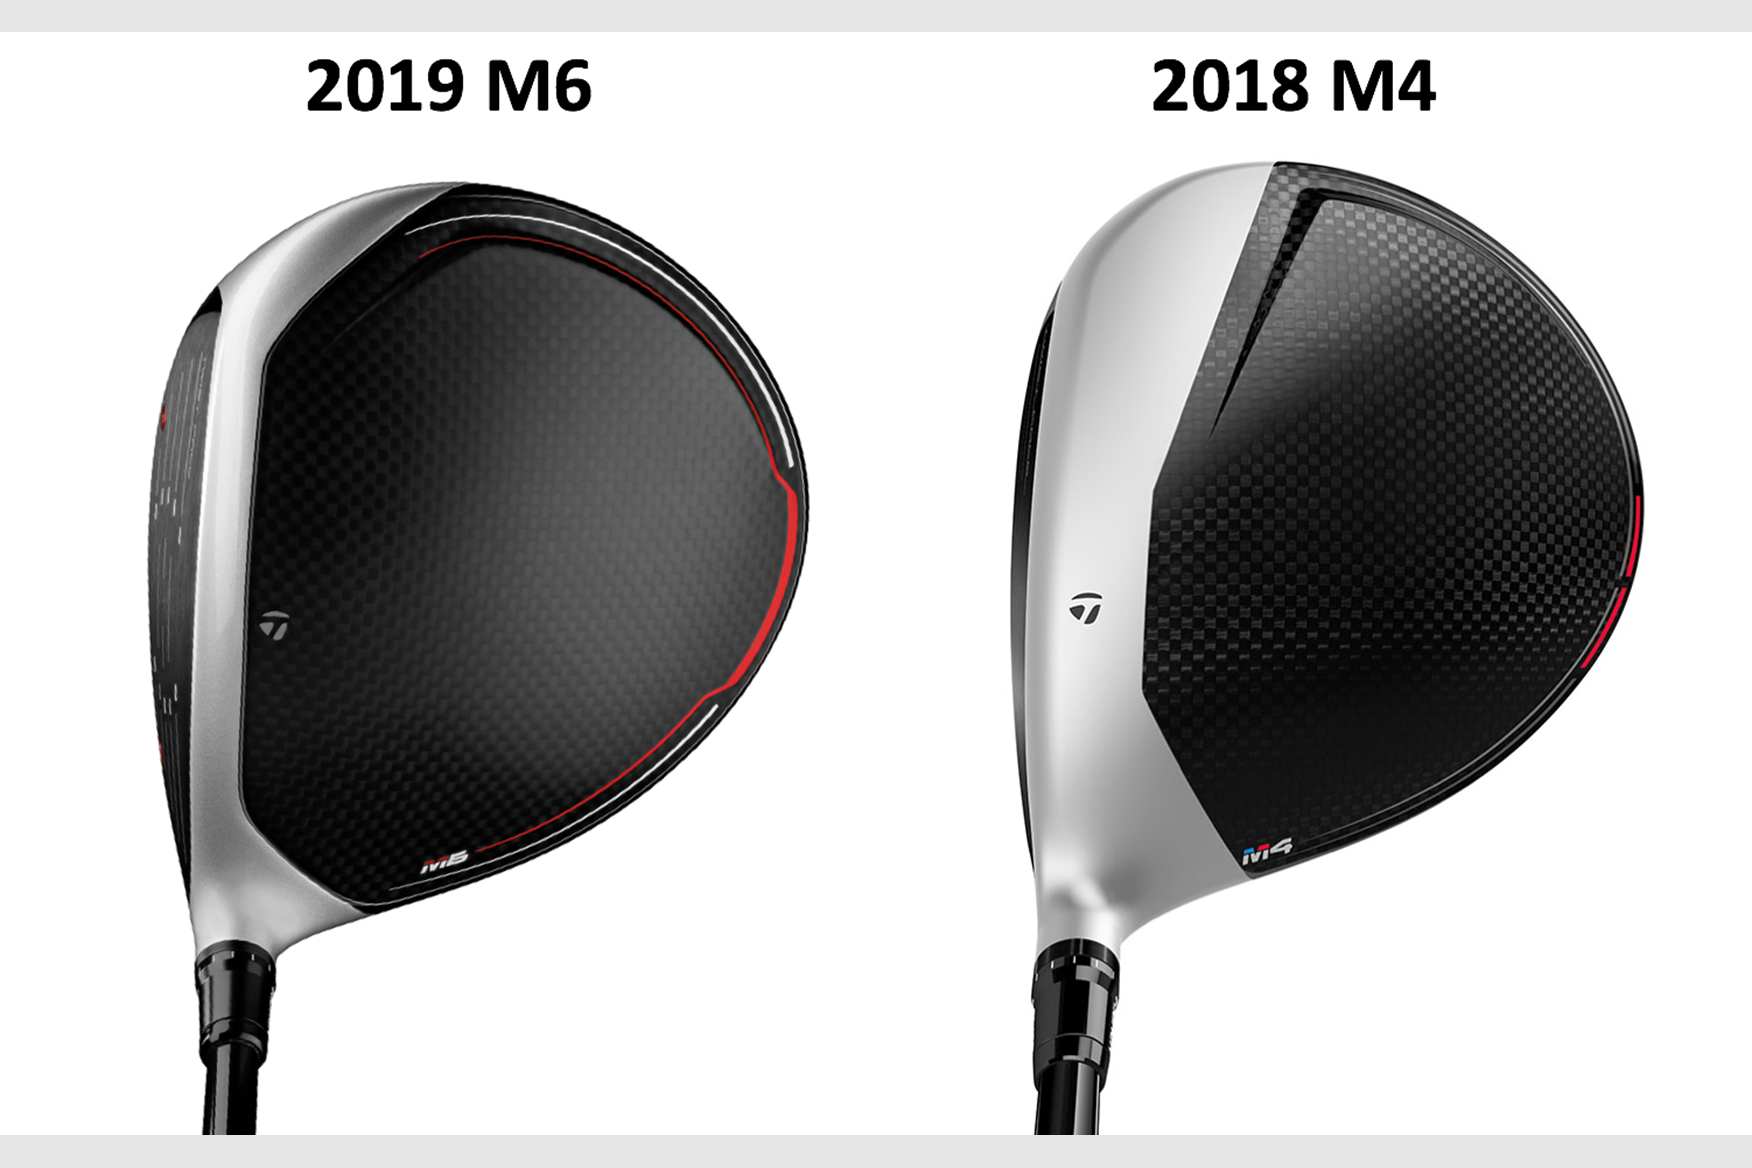 taylormade m6 driver review